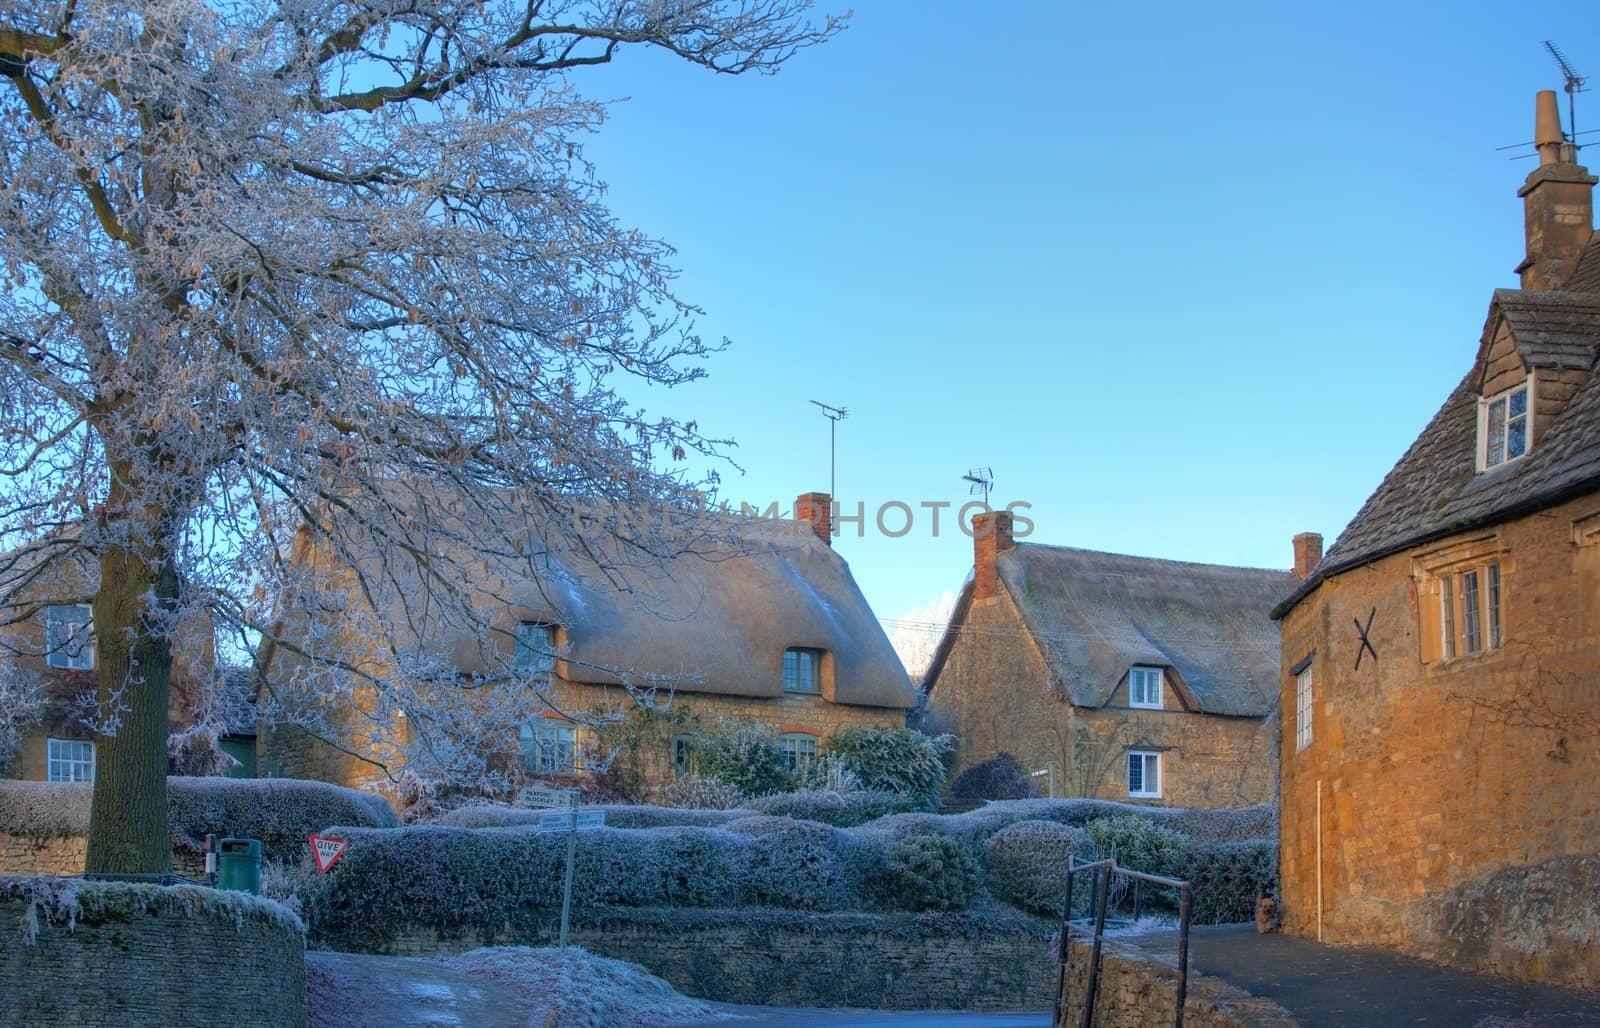 A winters morning at Ebrington village near Chipping Campden, Gloucestershire, England.